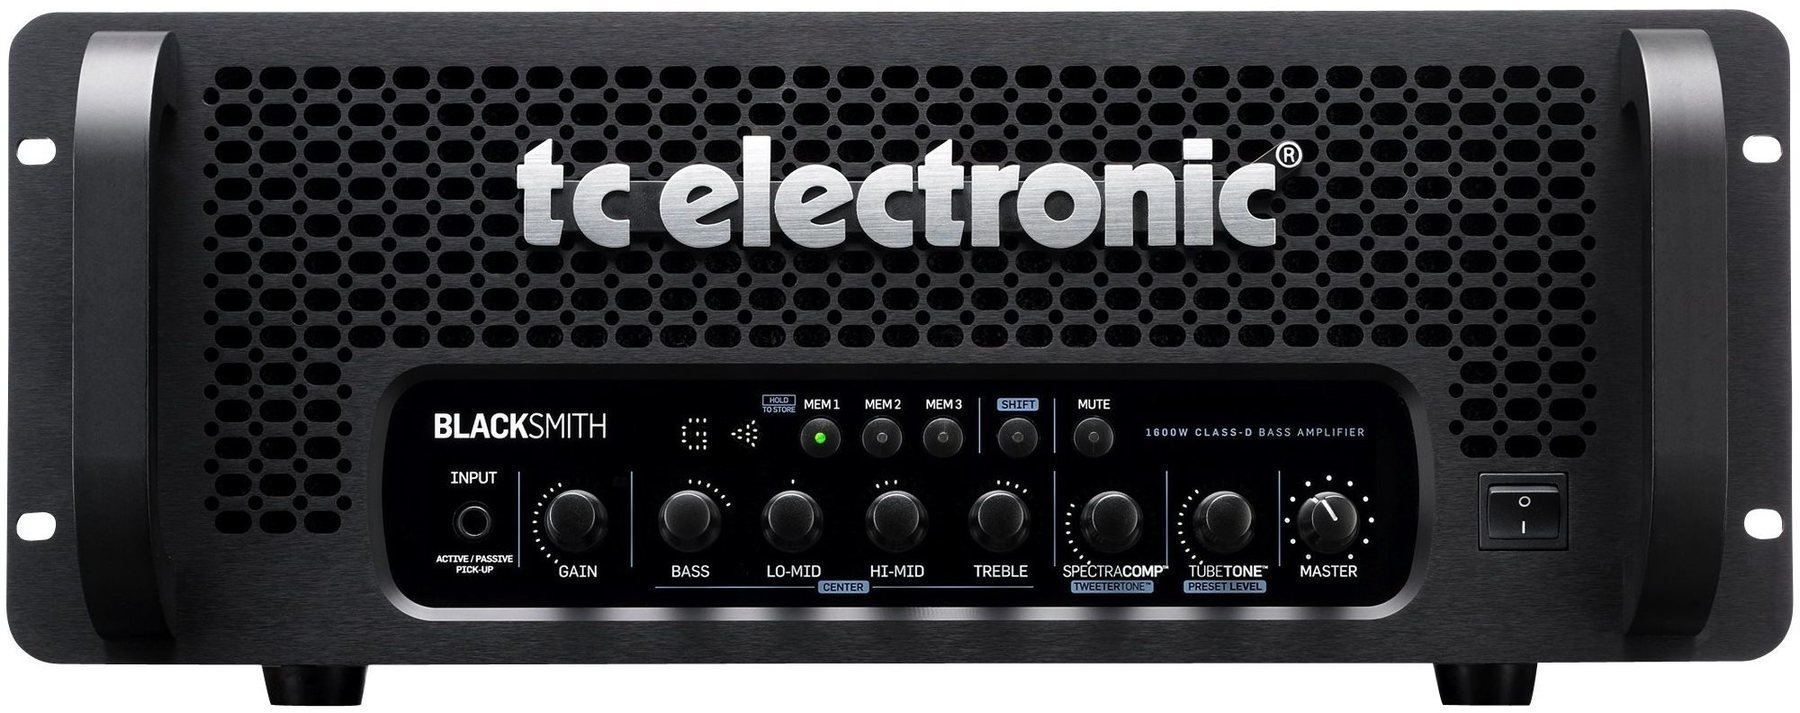 Solid-State Bass Amplifier TC Electronic Blacksmith